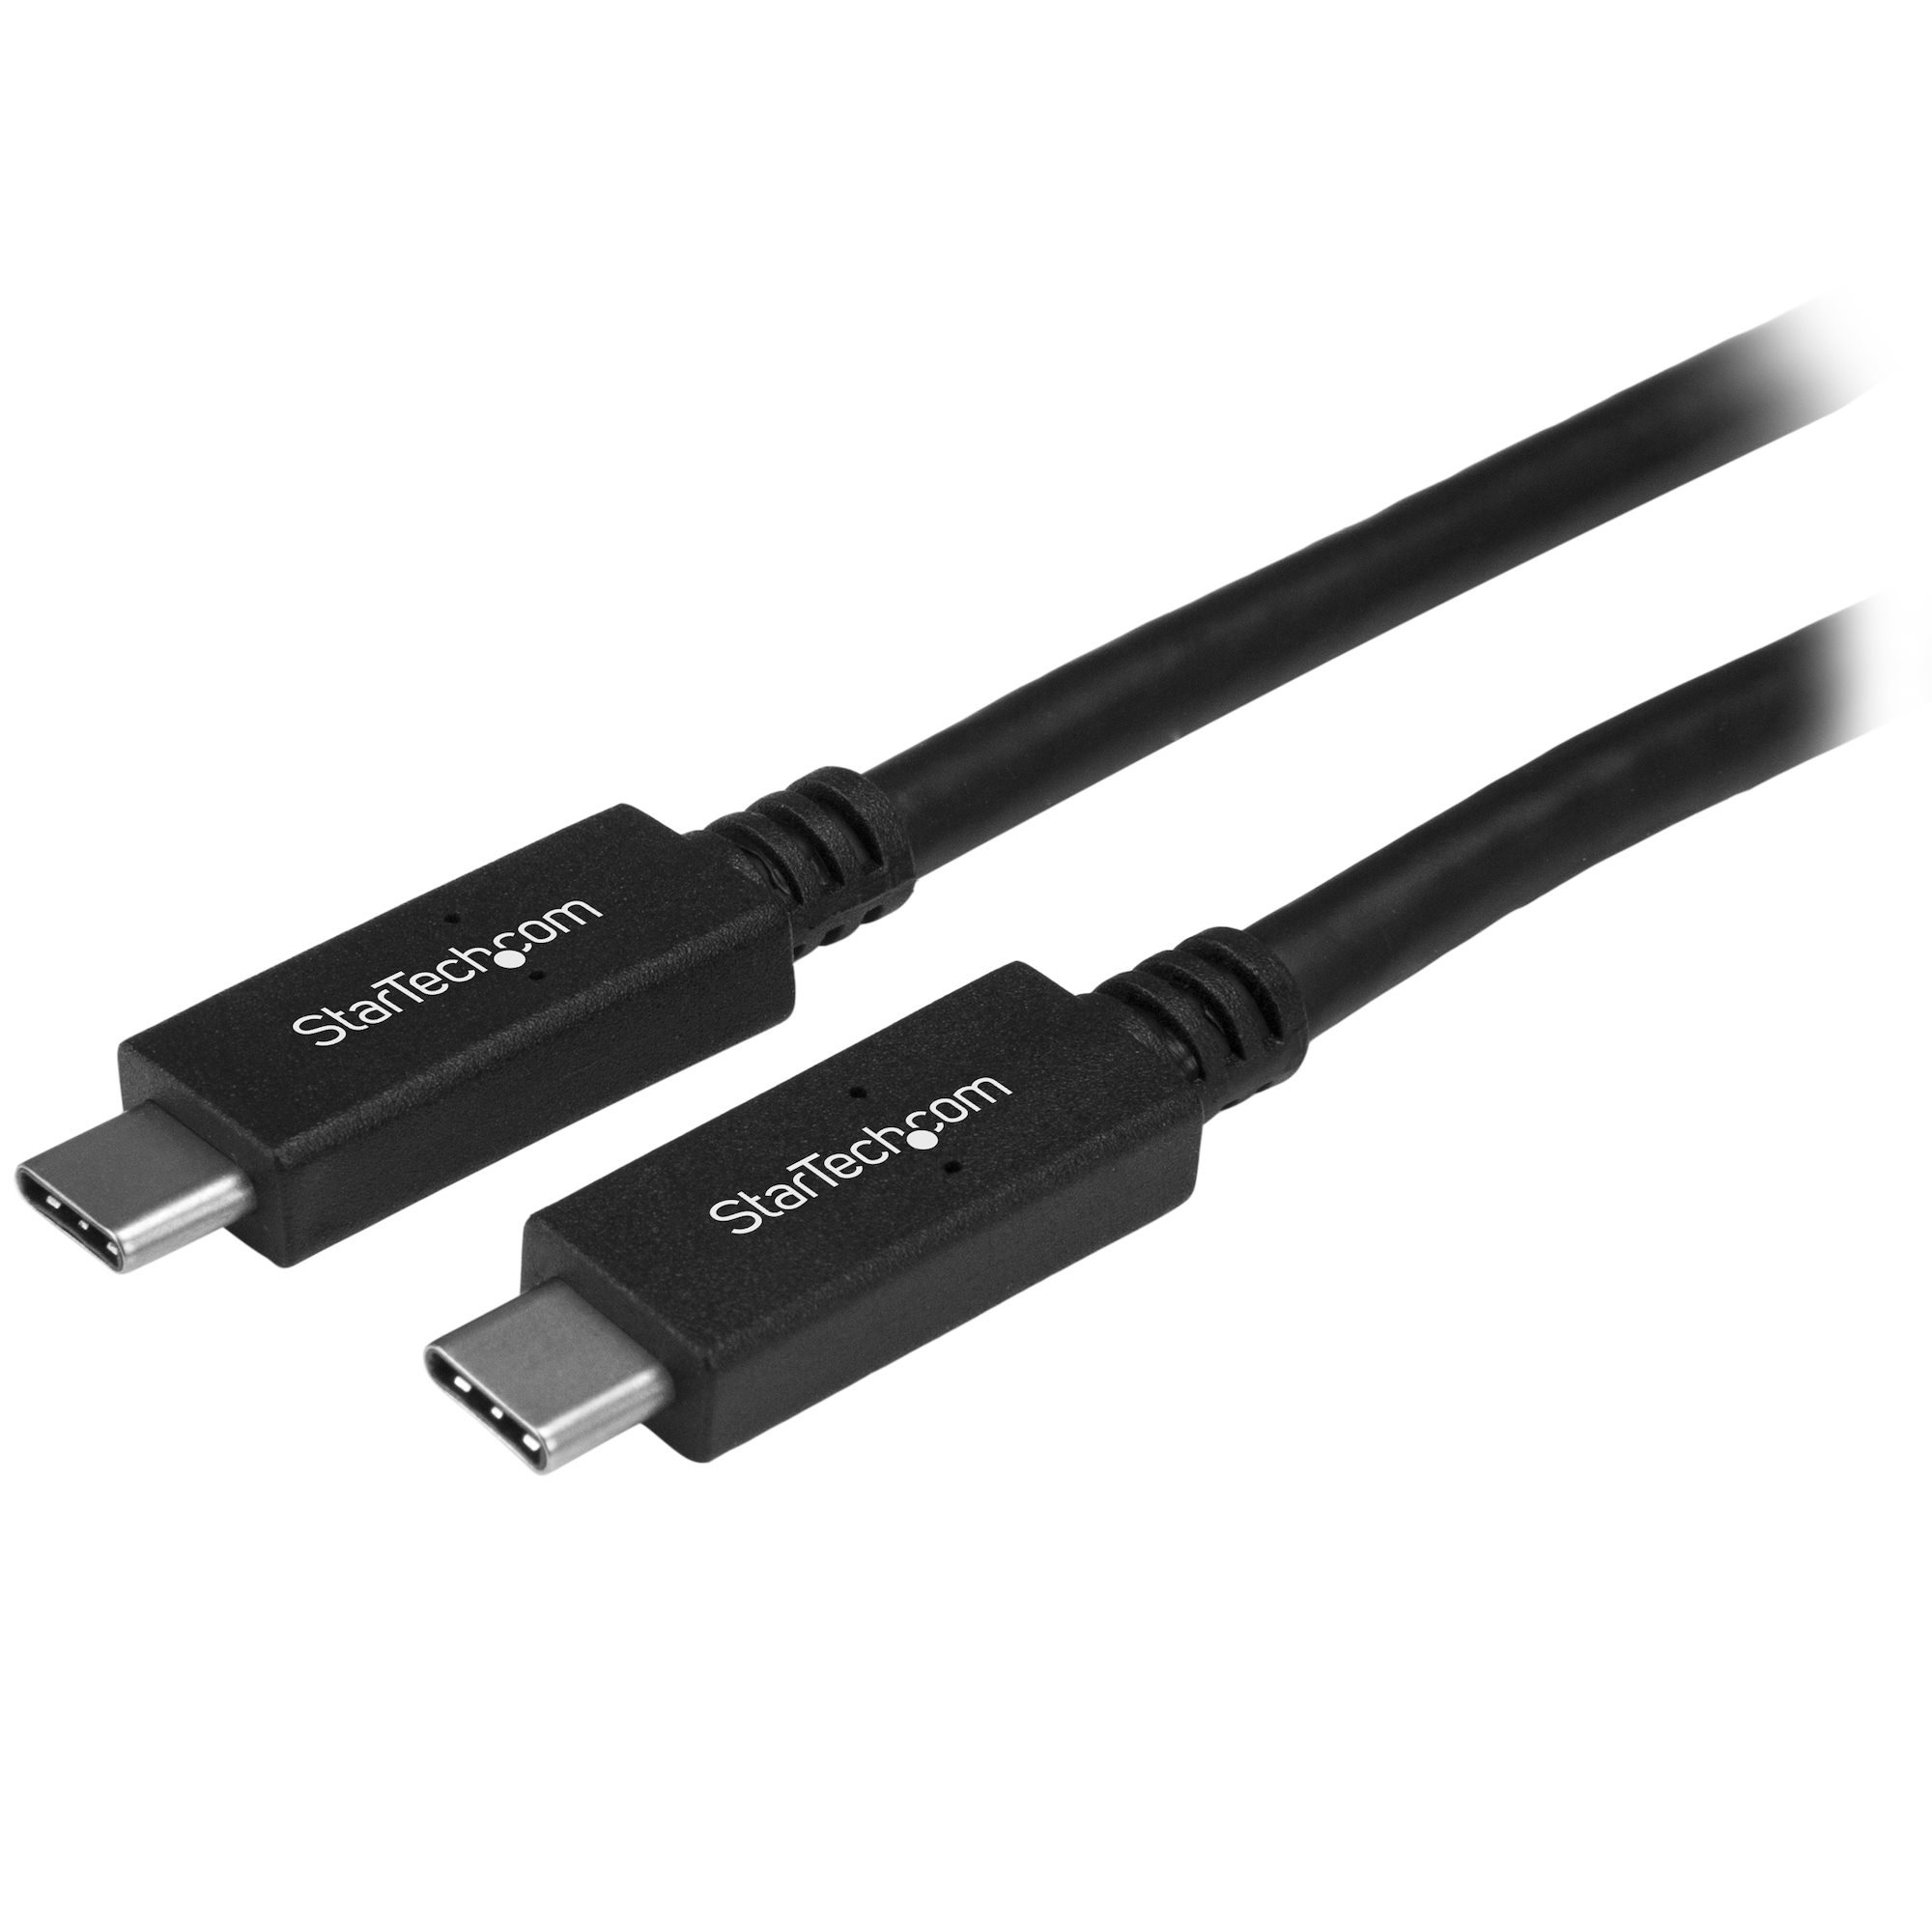 Expertise Mechanics Envision USB C Cable with PD (3A) 2m USB 3.0 - USB-C Cables | Europe